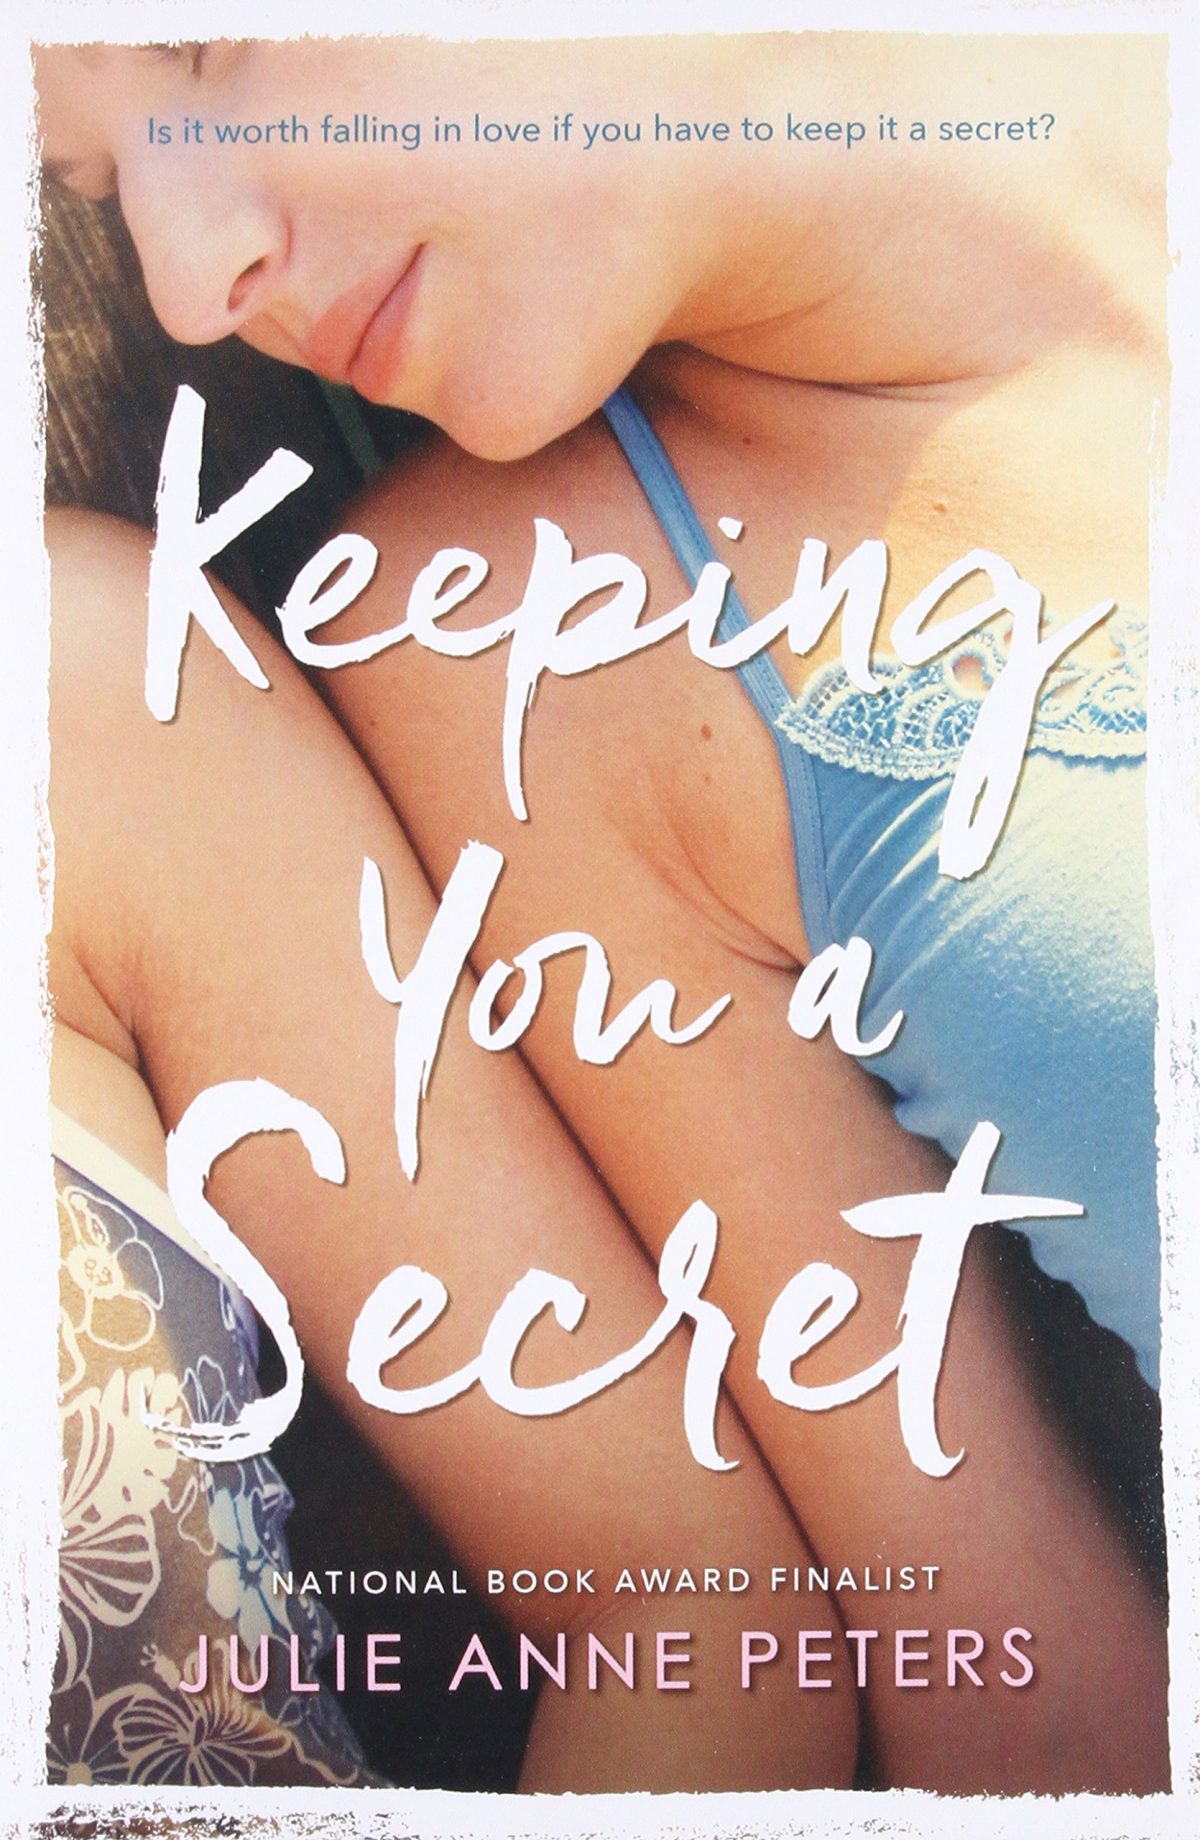 Keeping You A Secret by Julie Anne Peters (2003)